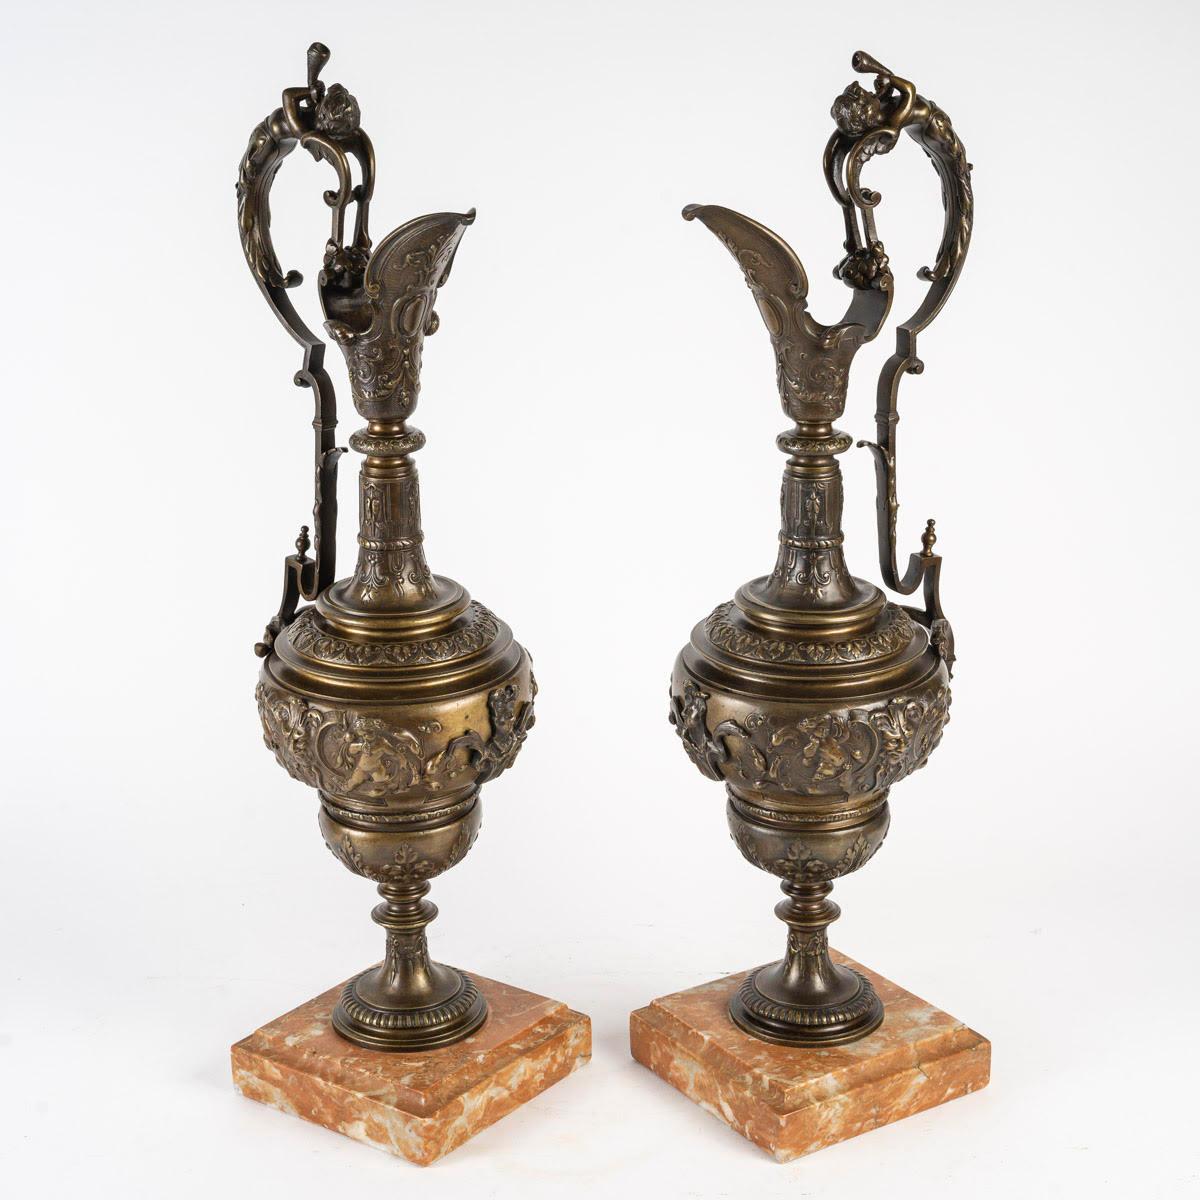 An important pair of Empire style bronze ewers, late 19th or early 20th century.

A pair of Empire style patinated bronze ewers with marble base, late 19th or early 20th century.
H: 60cm, W: 20cm, D: 15cm